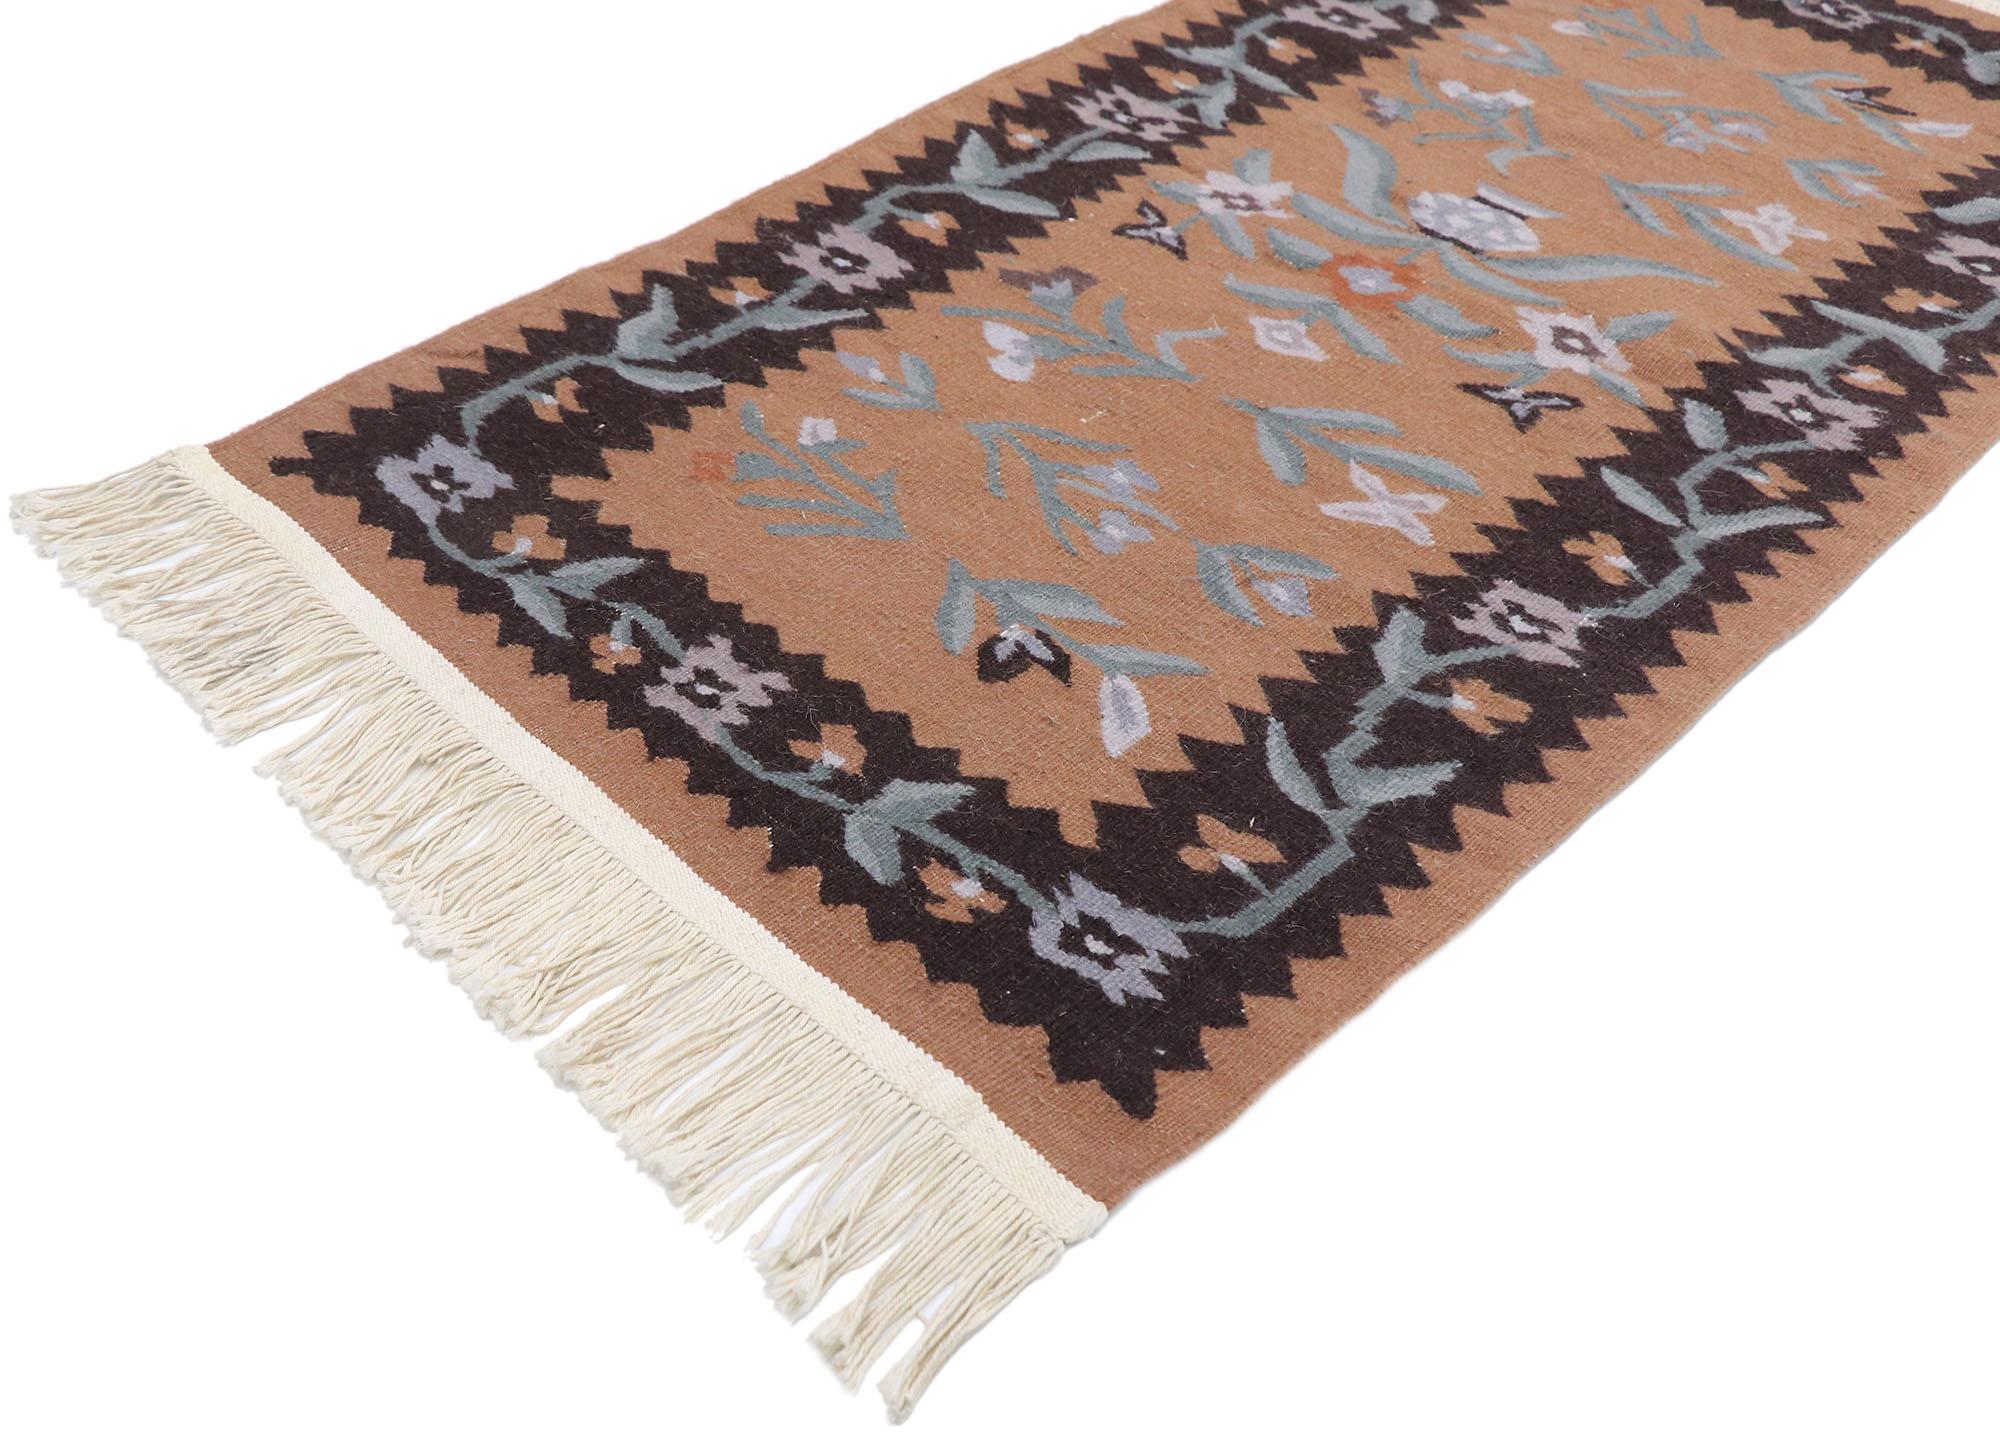 77855 vintage Persian Shiraz Kilim rug with Rustic Farmhouse style 02'02 x 04'01. Take a timeless, tailored design, mix in a dash of romantic connotations to get this fresh look that’s as comfortable as it is chic. Soft, bespoke vibes meet romantic